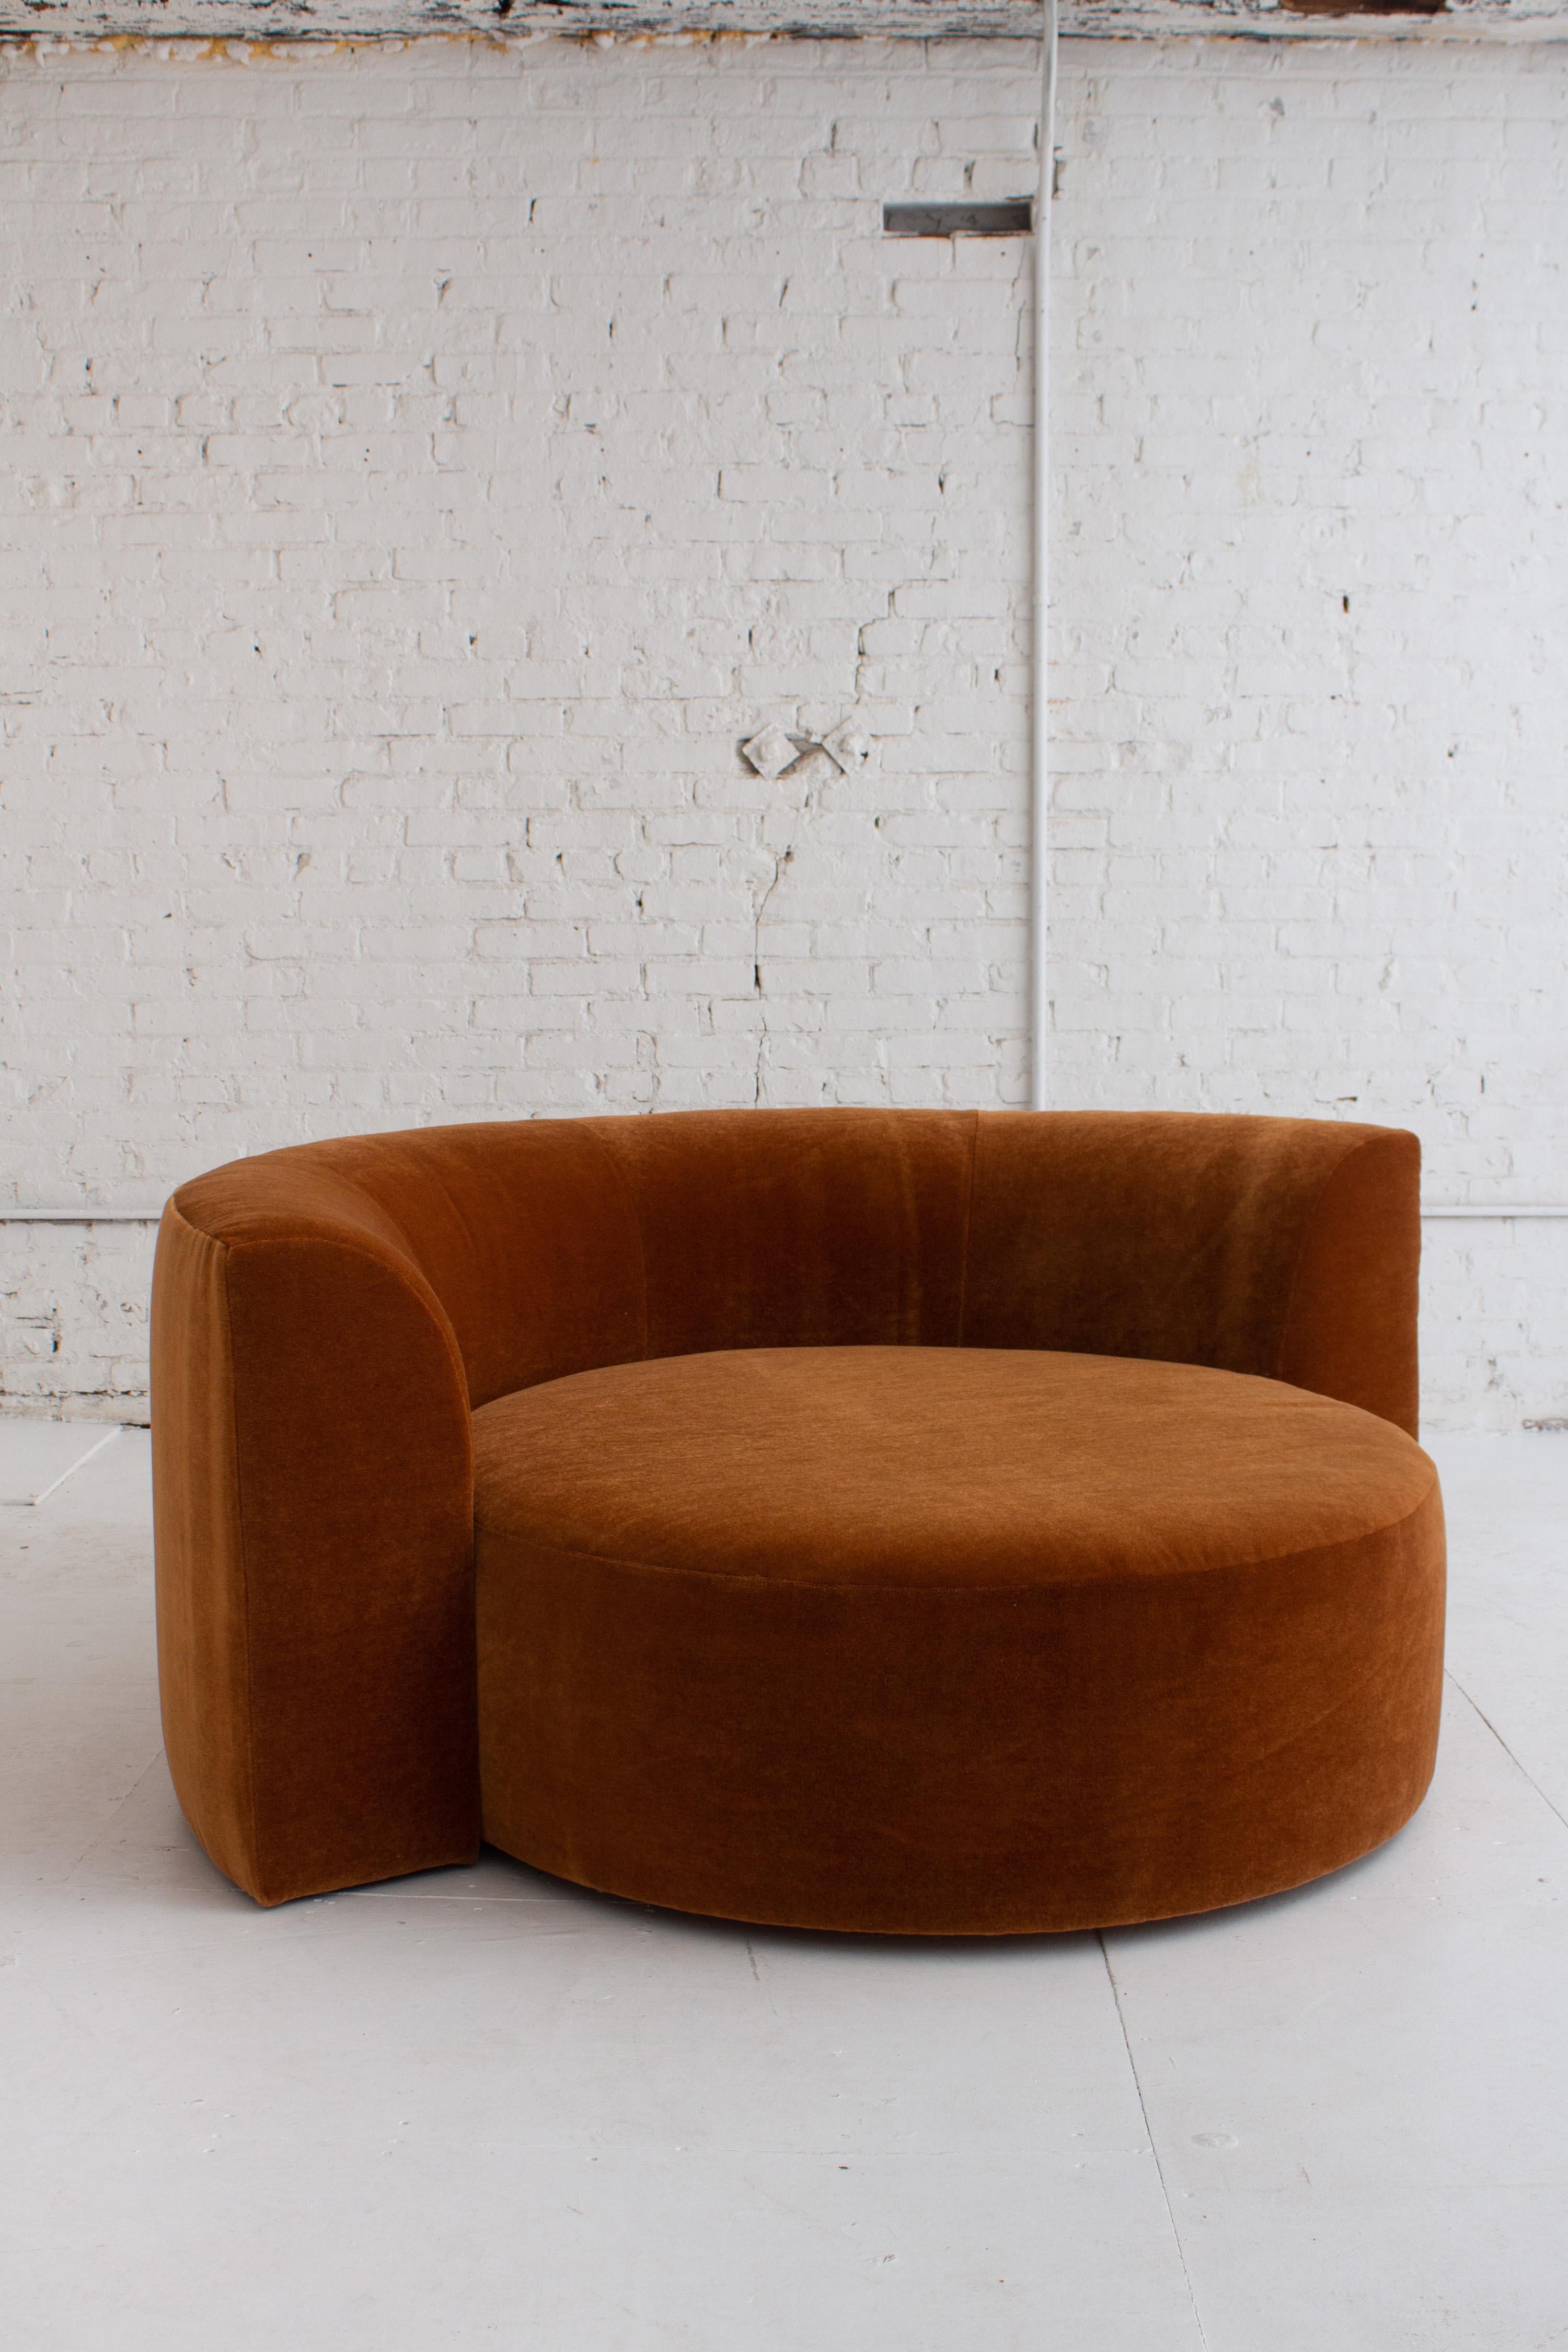 20th Century Circular Chaise Lounge in Mohair by Roger Rougier